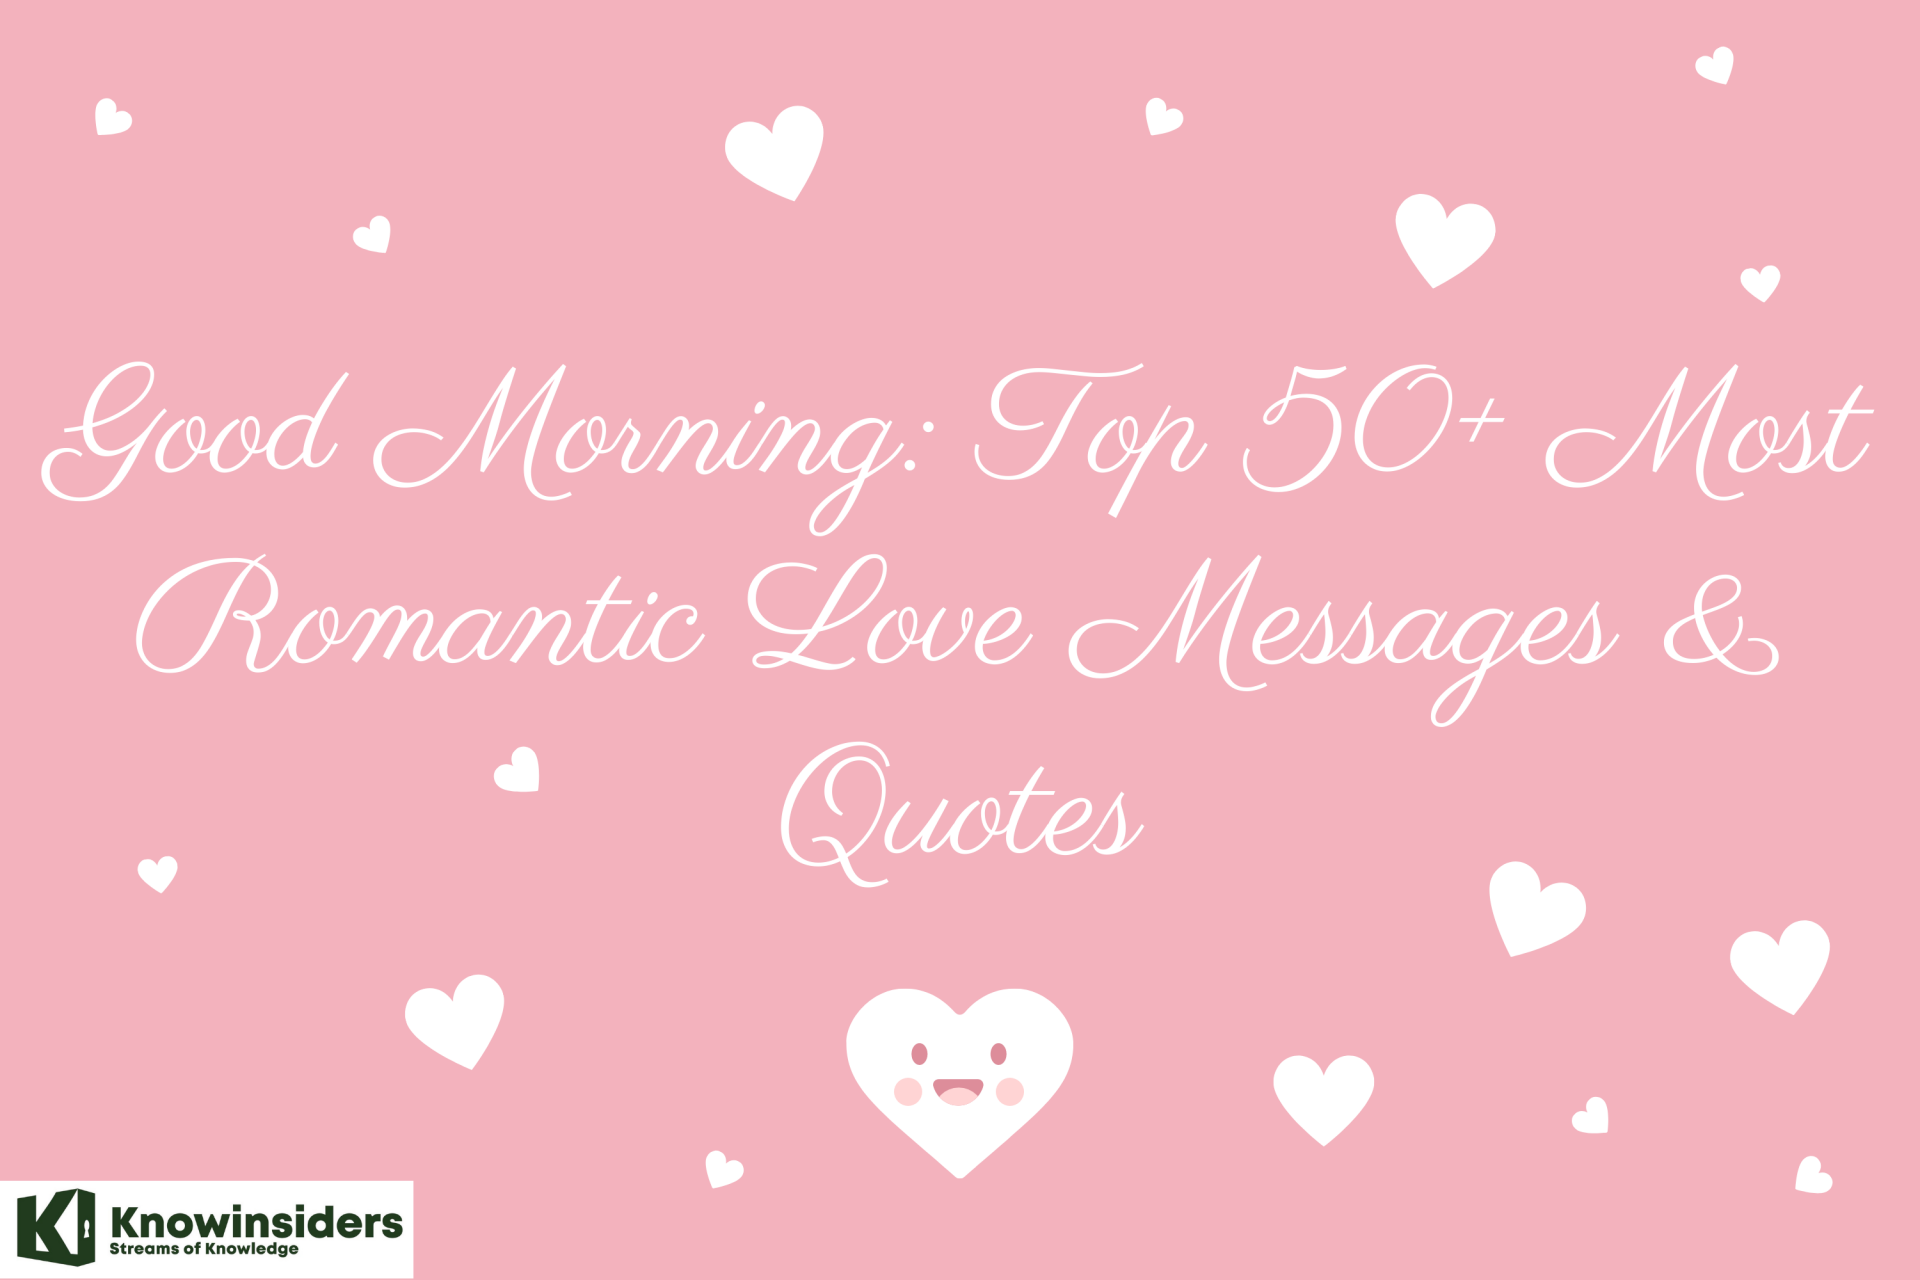 Good Morning: Top 50+ Most Romantic Love Messages & Quotes